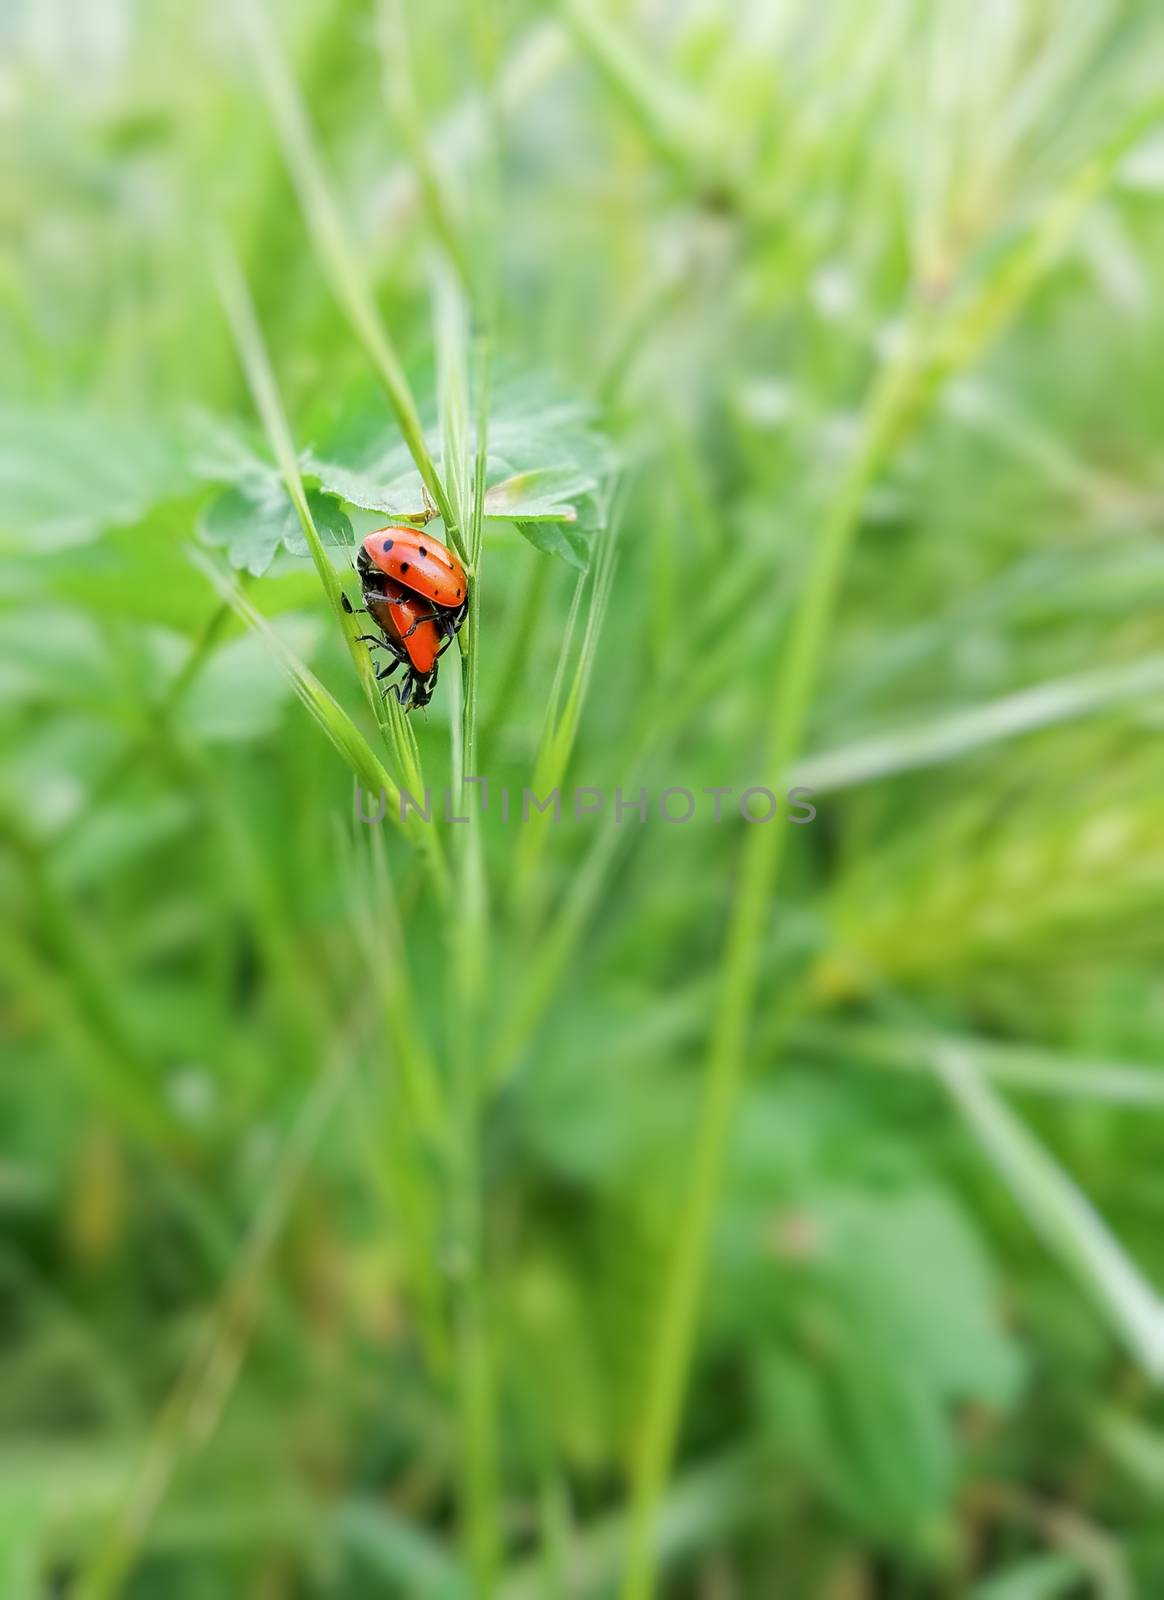 A couple of ladybugs mating in the grass.